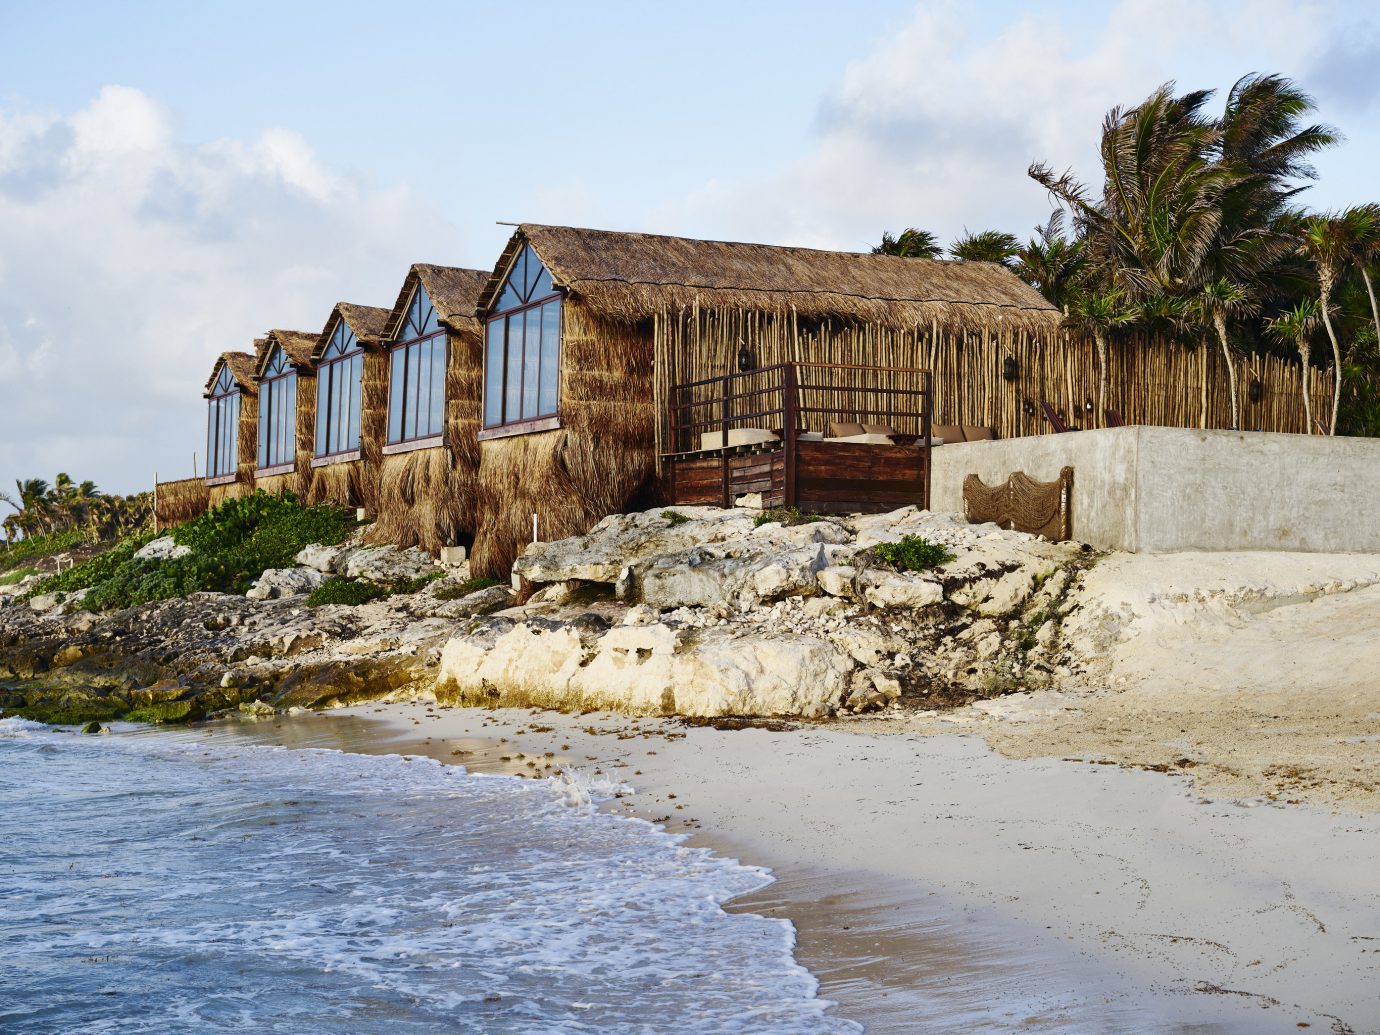 Boutique Hotels Hotels Mexico Tulum sky outdoor body of water house Coast water shore Sea wood Nature real estate cottage Ocean old shack tree rock stone